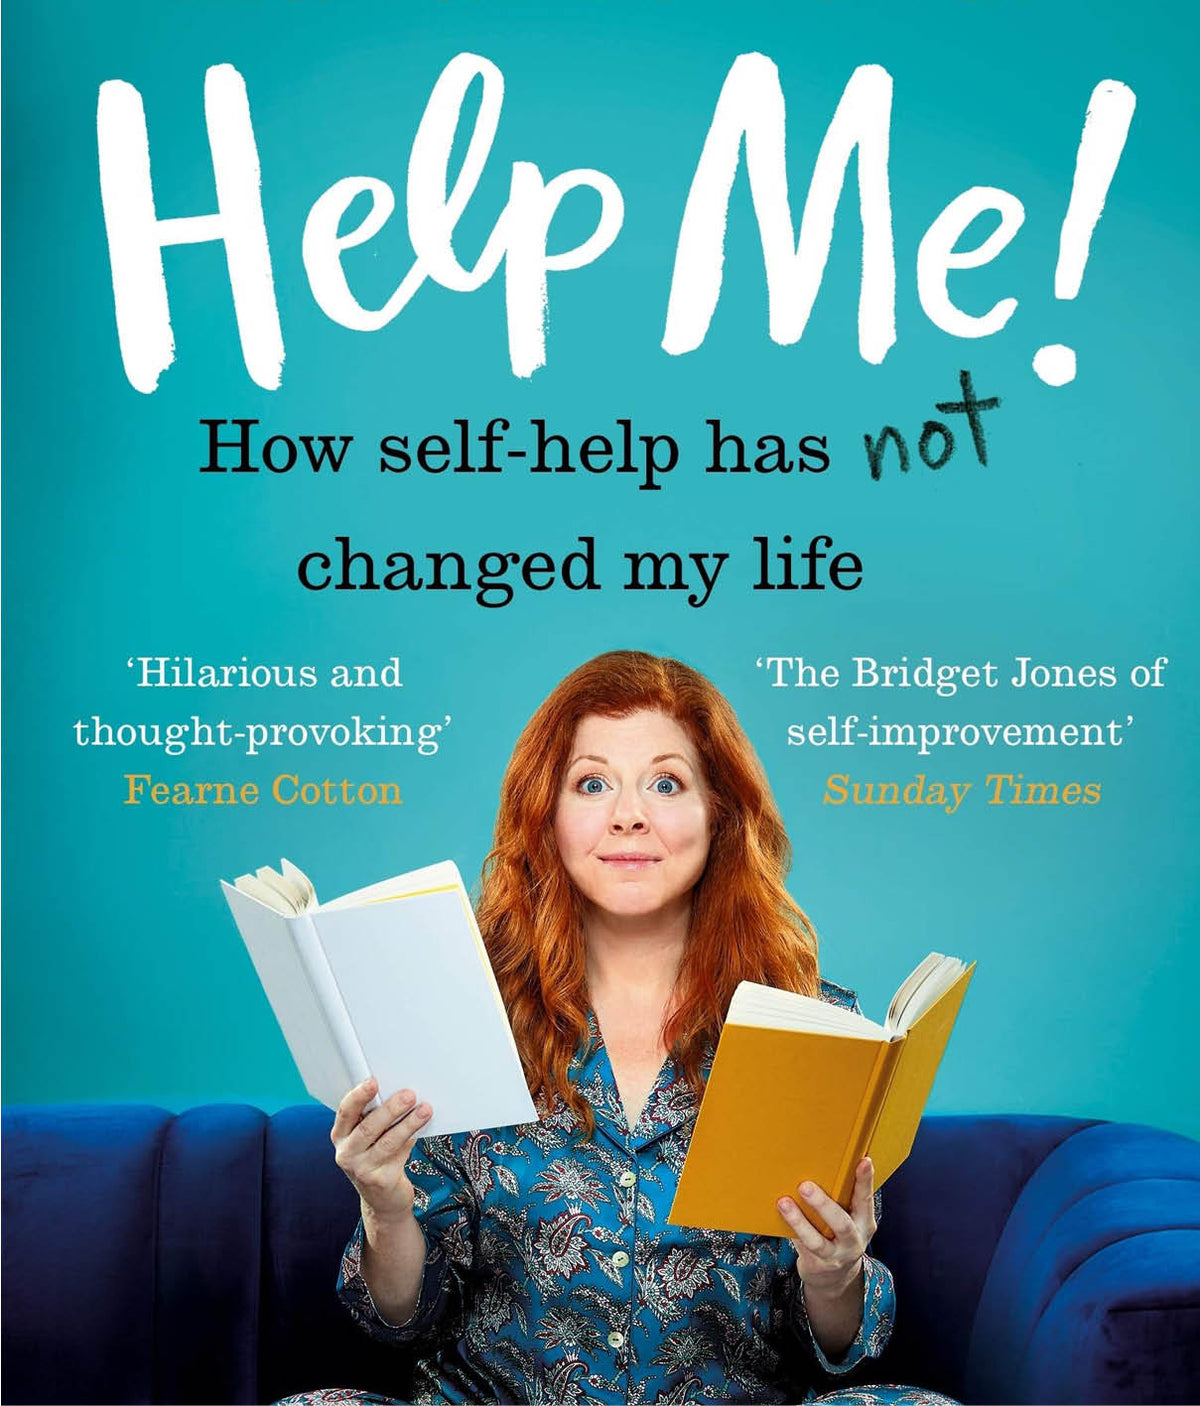 Help Me!: How Self-Help Has Not Changed My Life by Marianne Power